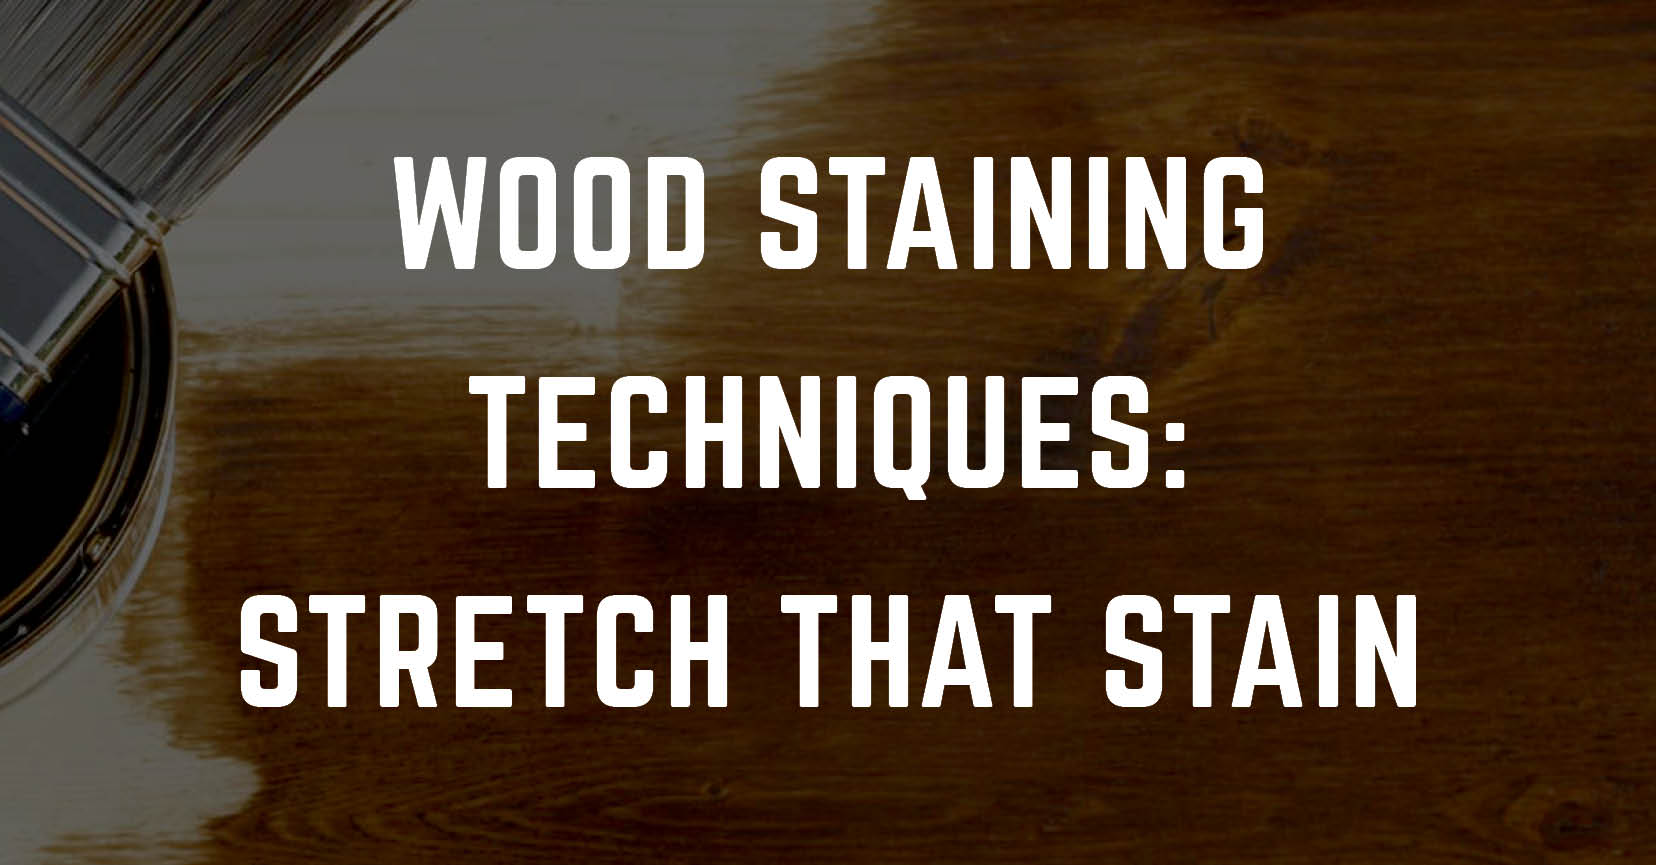 wood staining techniques text